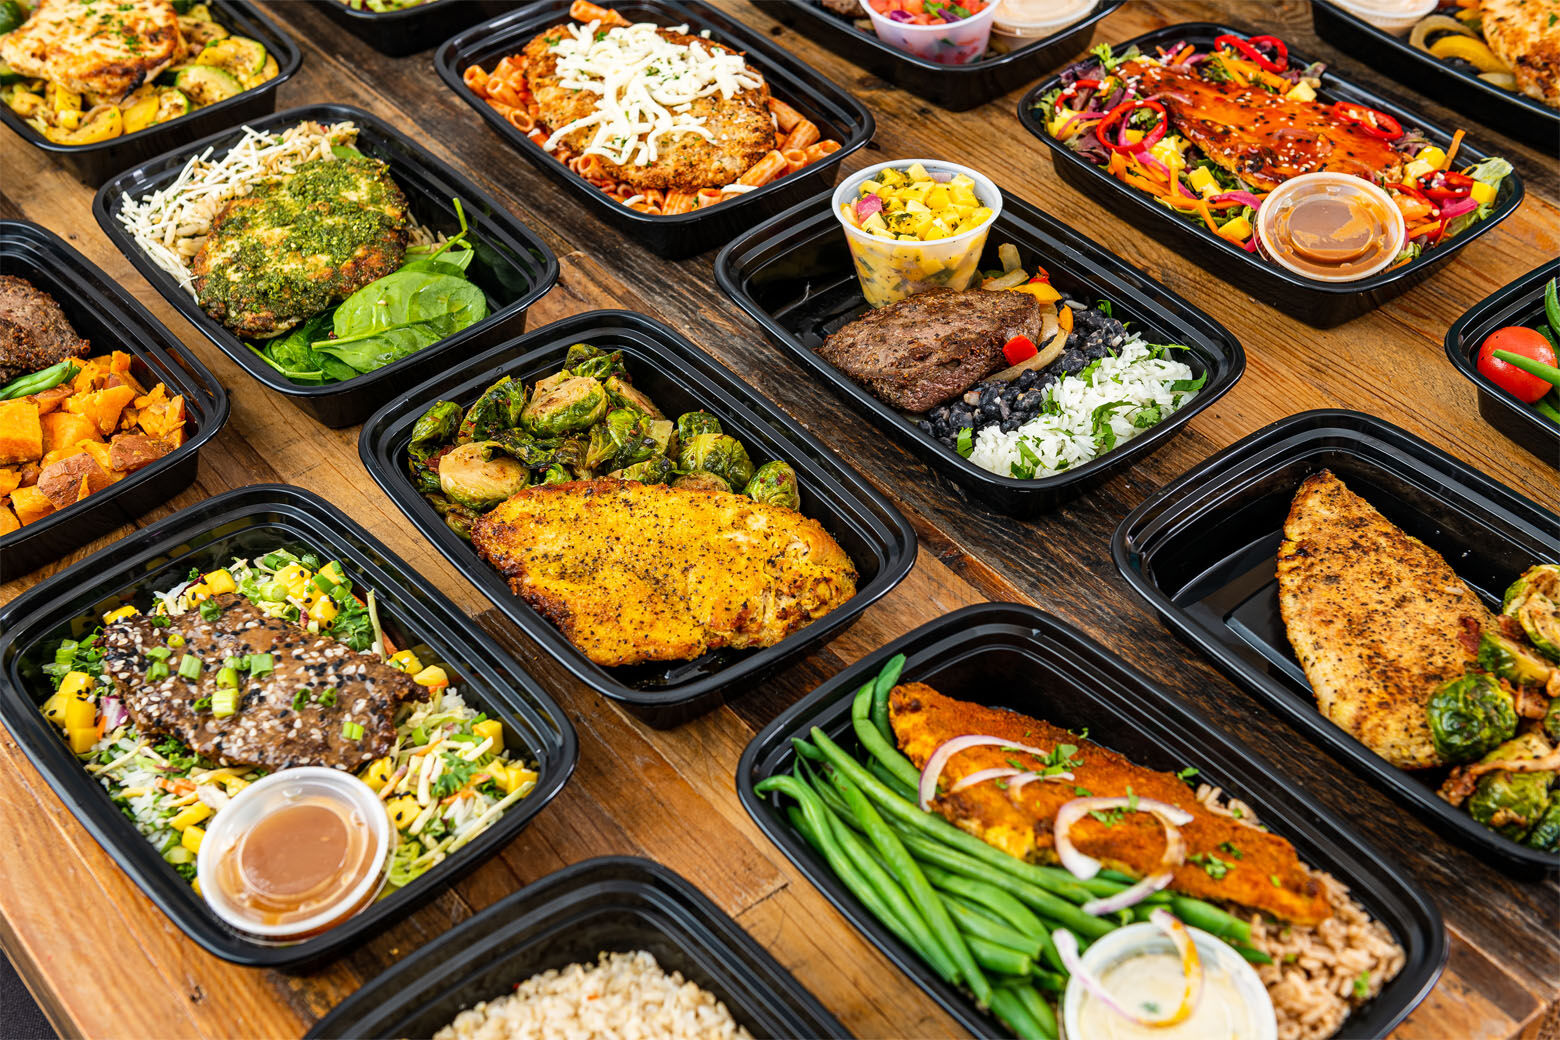 MightyMeals has over 100 chef-prepared, made-to-order healthy meals that change weekly. (Courtesy MightyMeals)